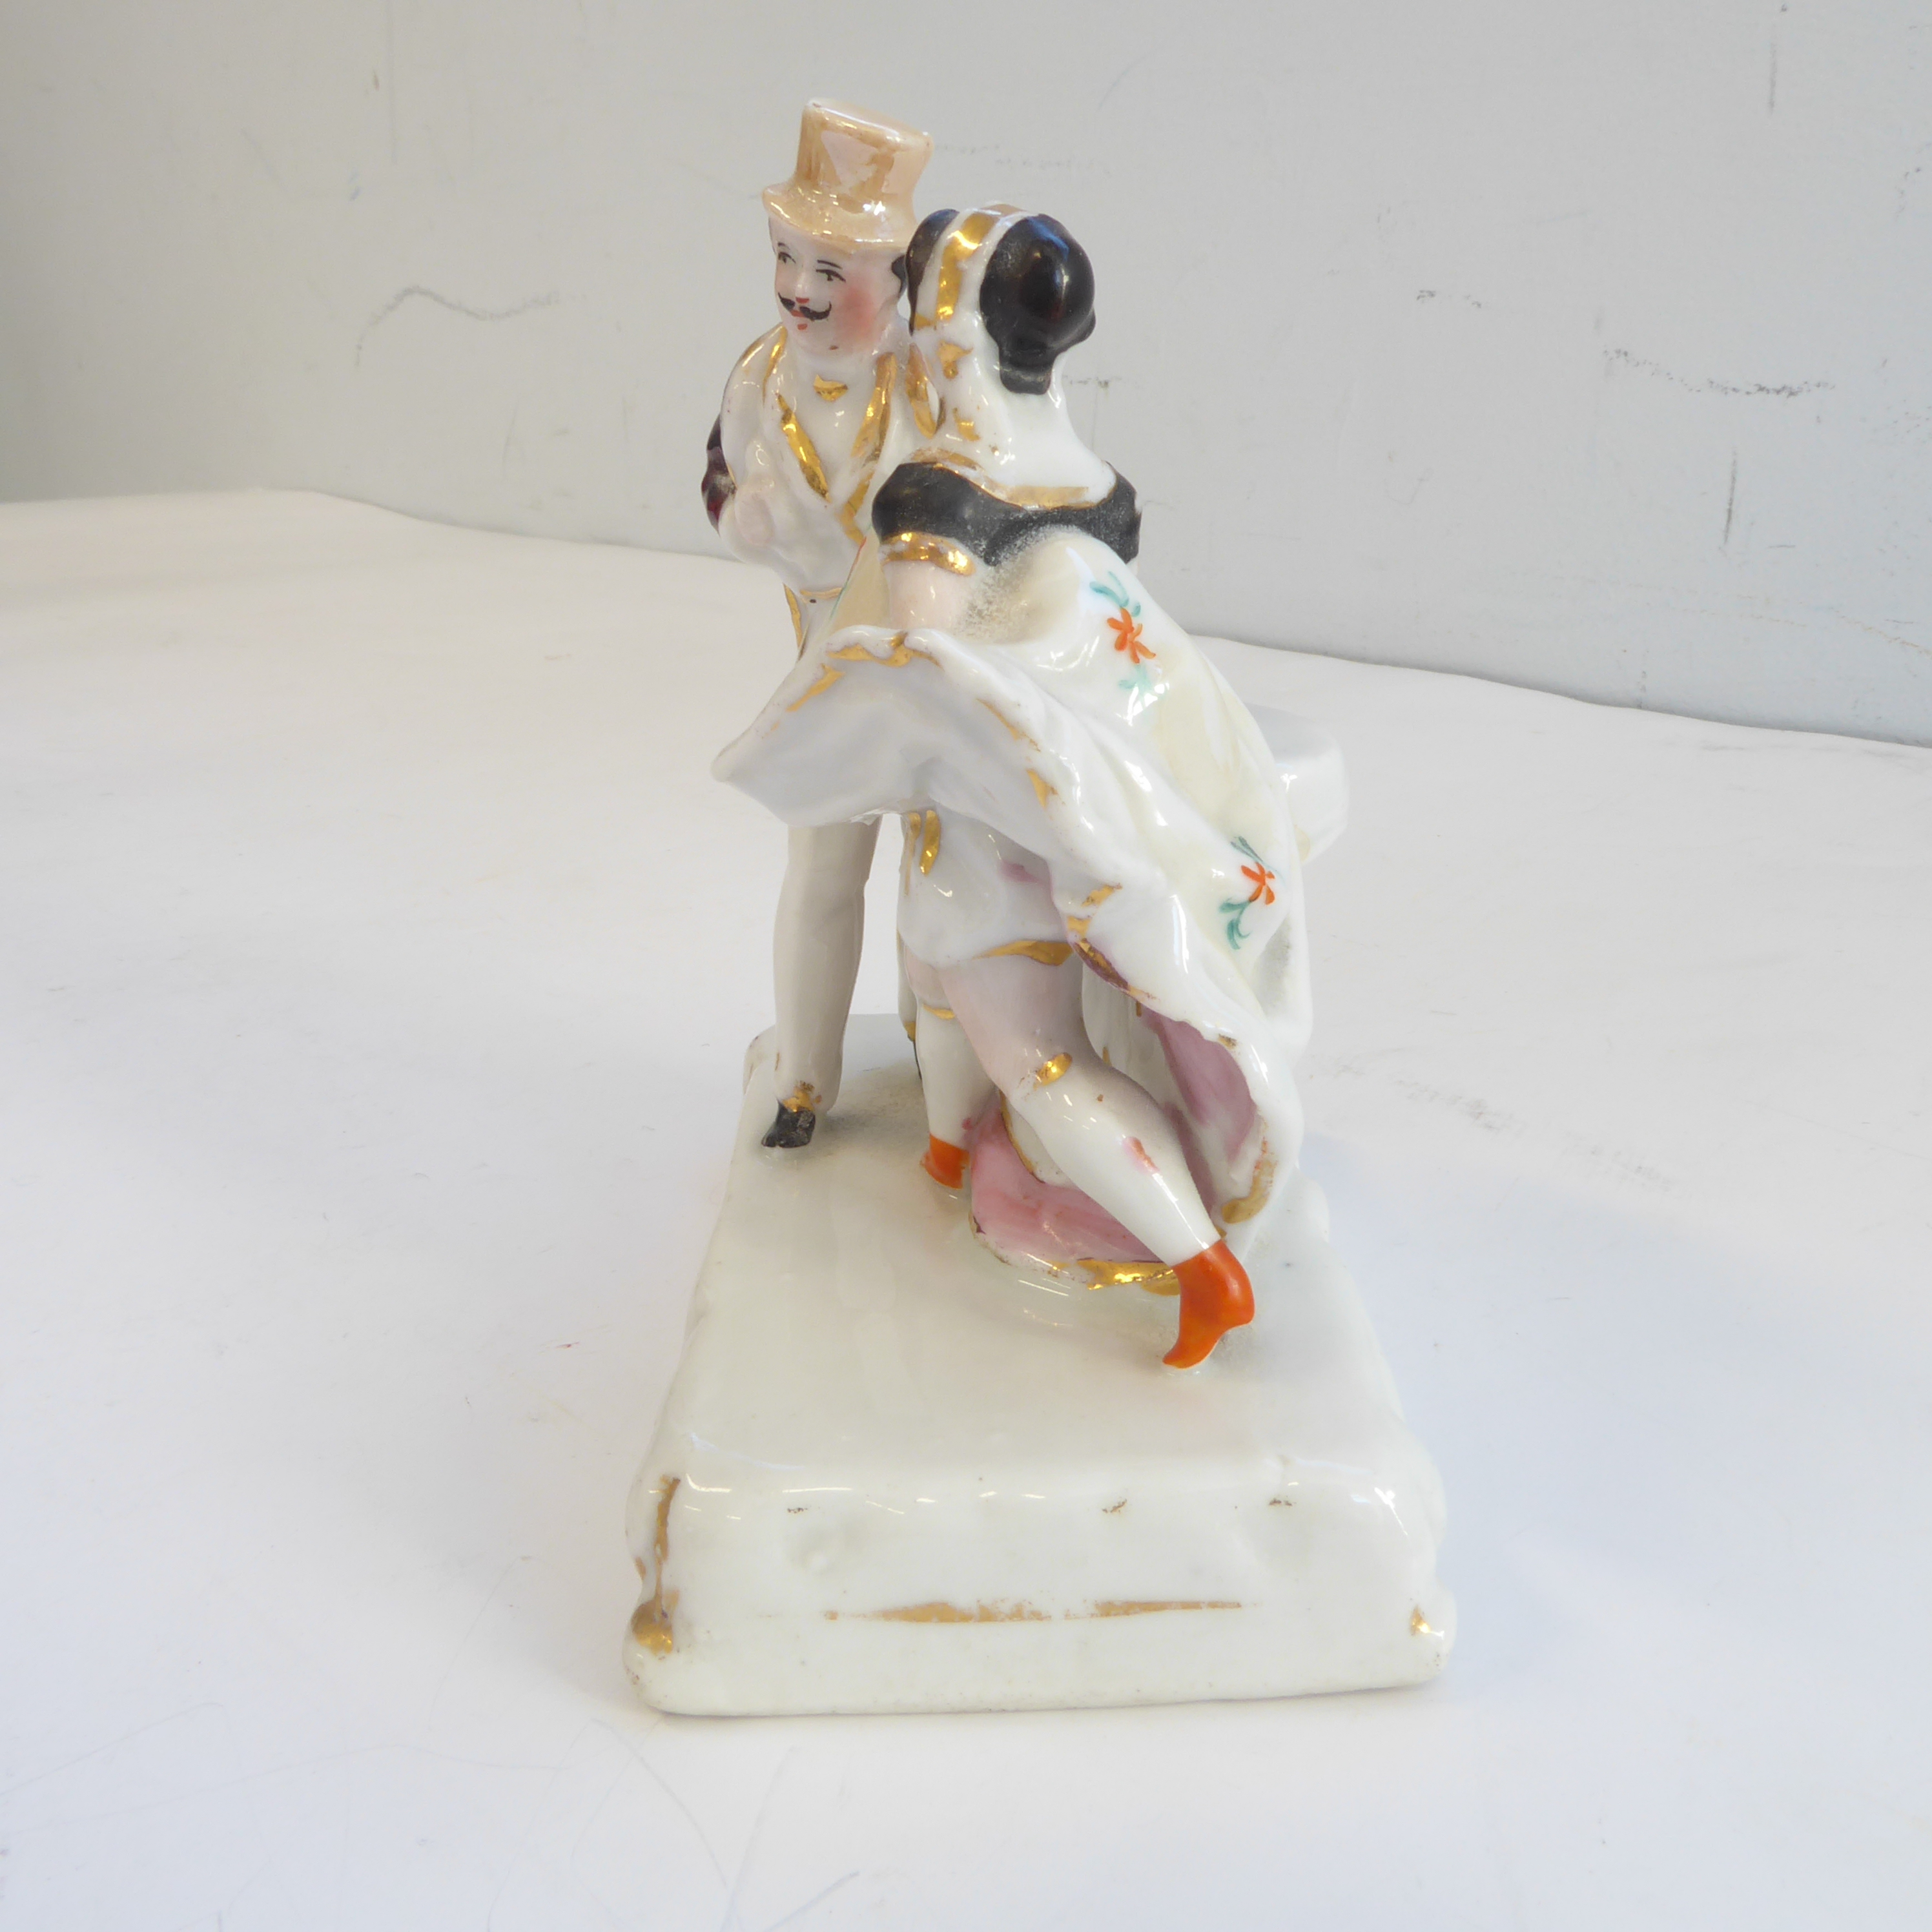 Twelve 19th century fairings to include 'The attentive maid', 'The broken hoop', 'The wedding - Image 48 of 49